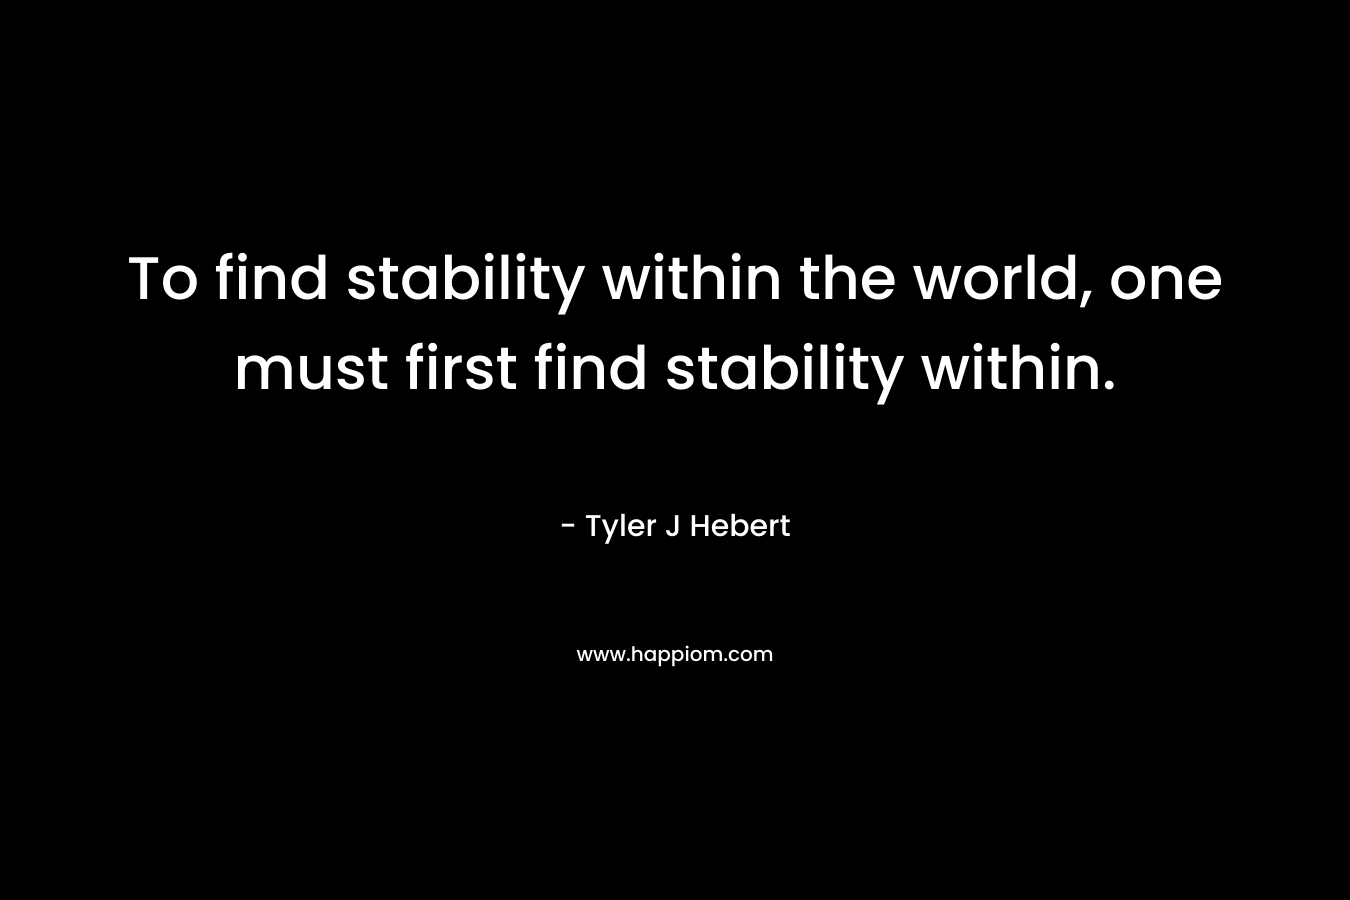 To find stability within the world, one must first find stability within. – Tyler J Hebert